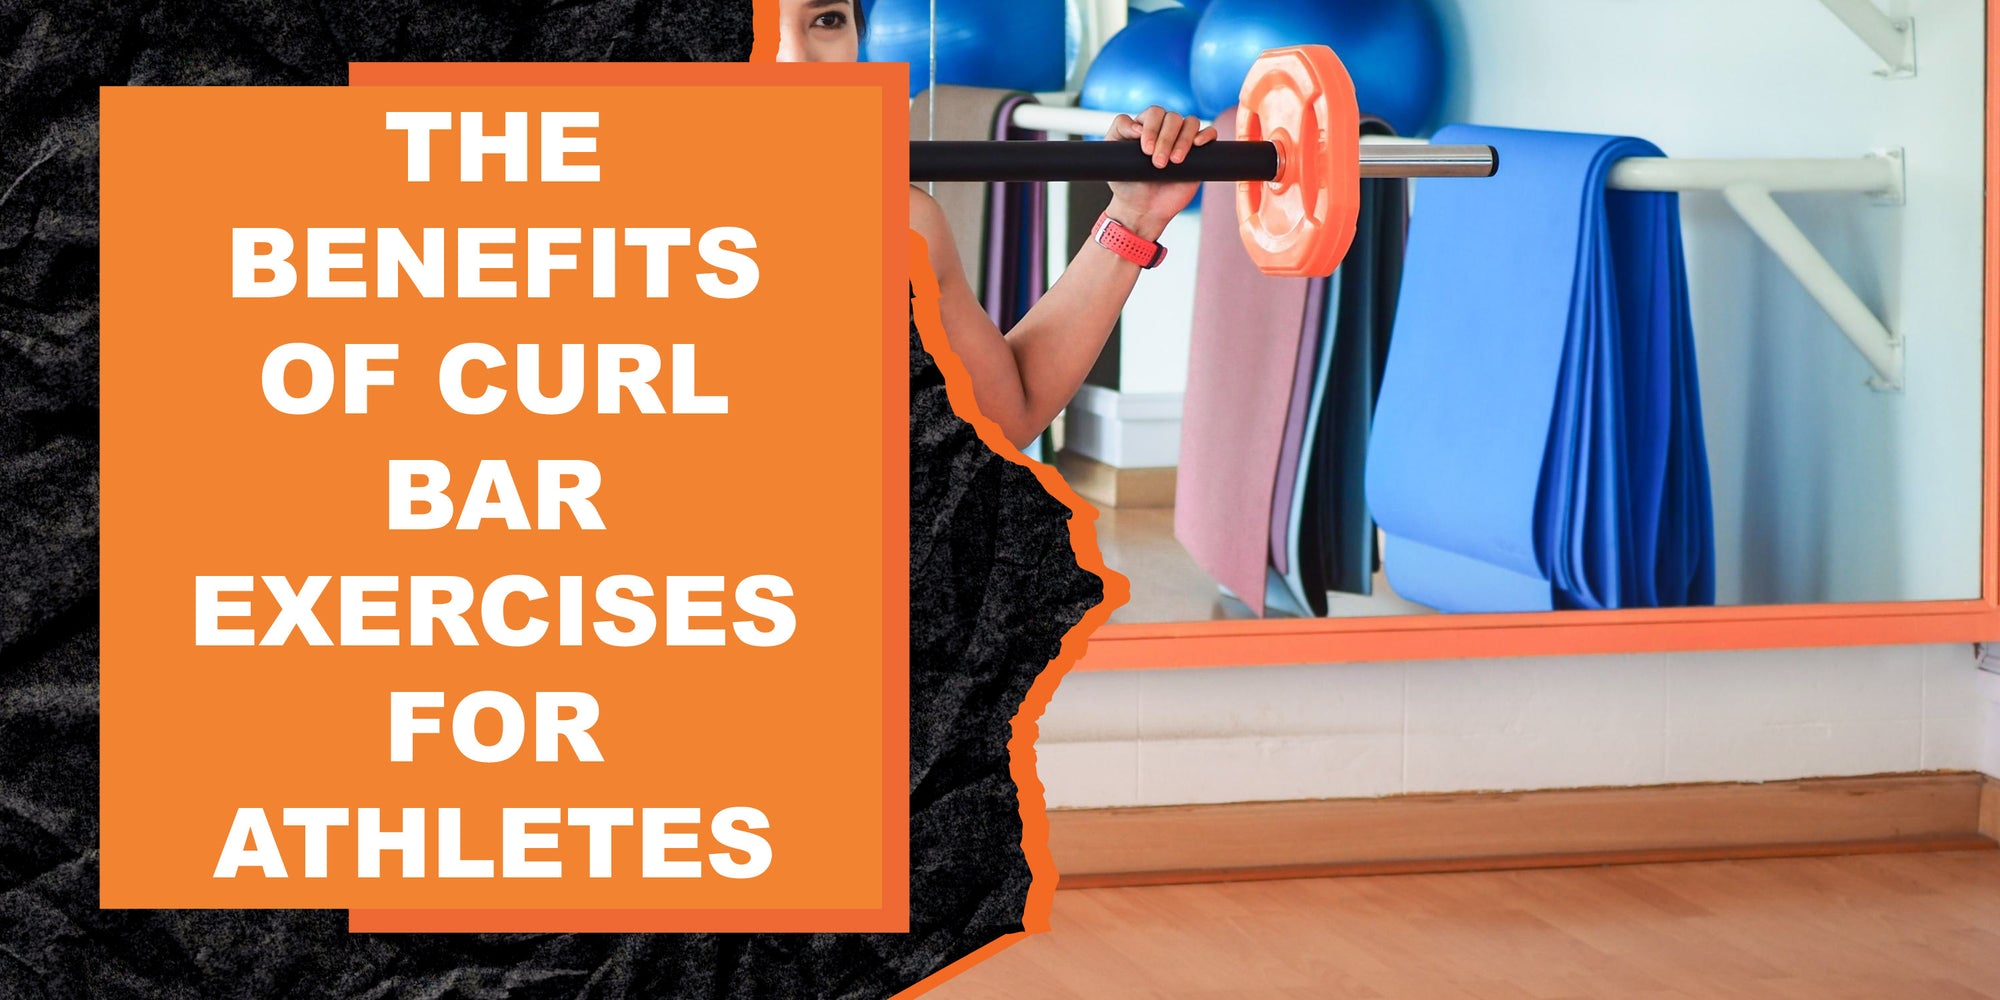 The Benefits of Curl Bar Exercises for Athletes